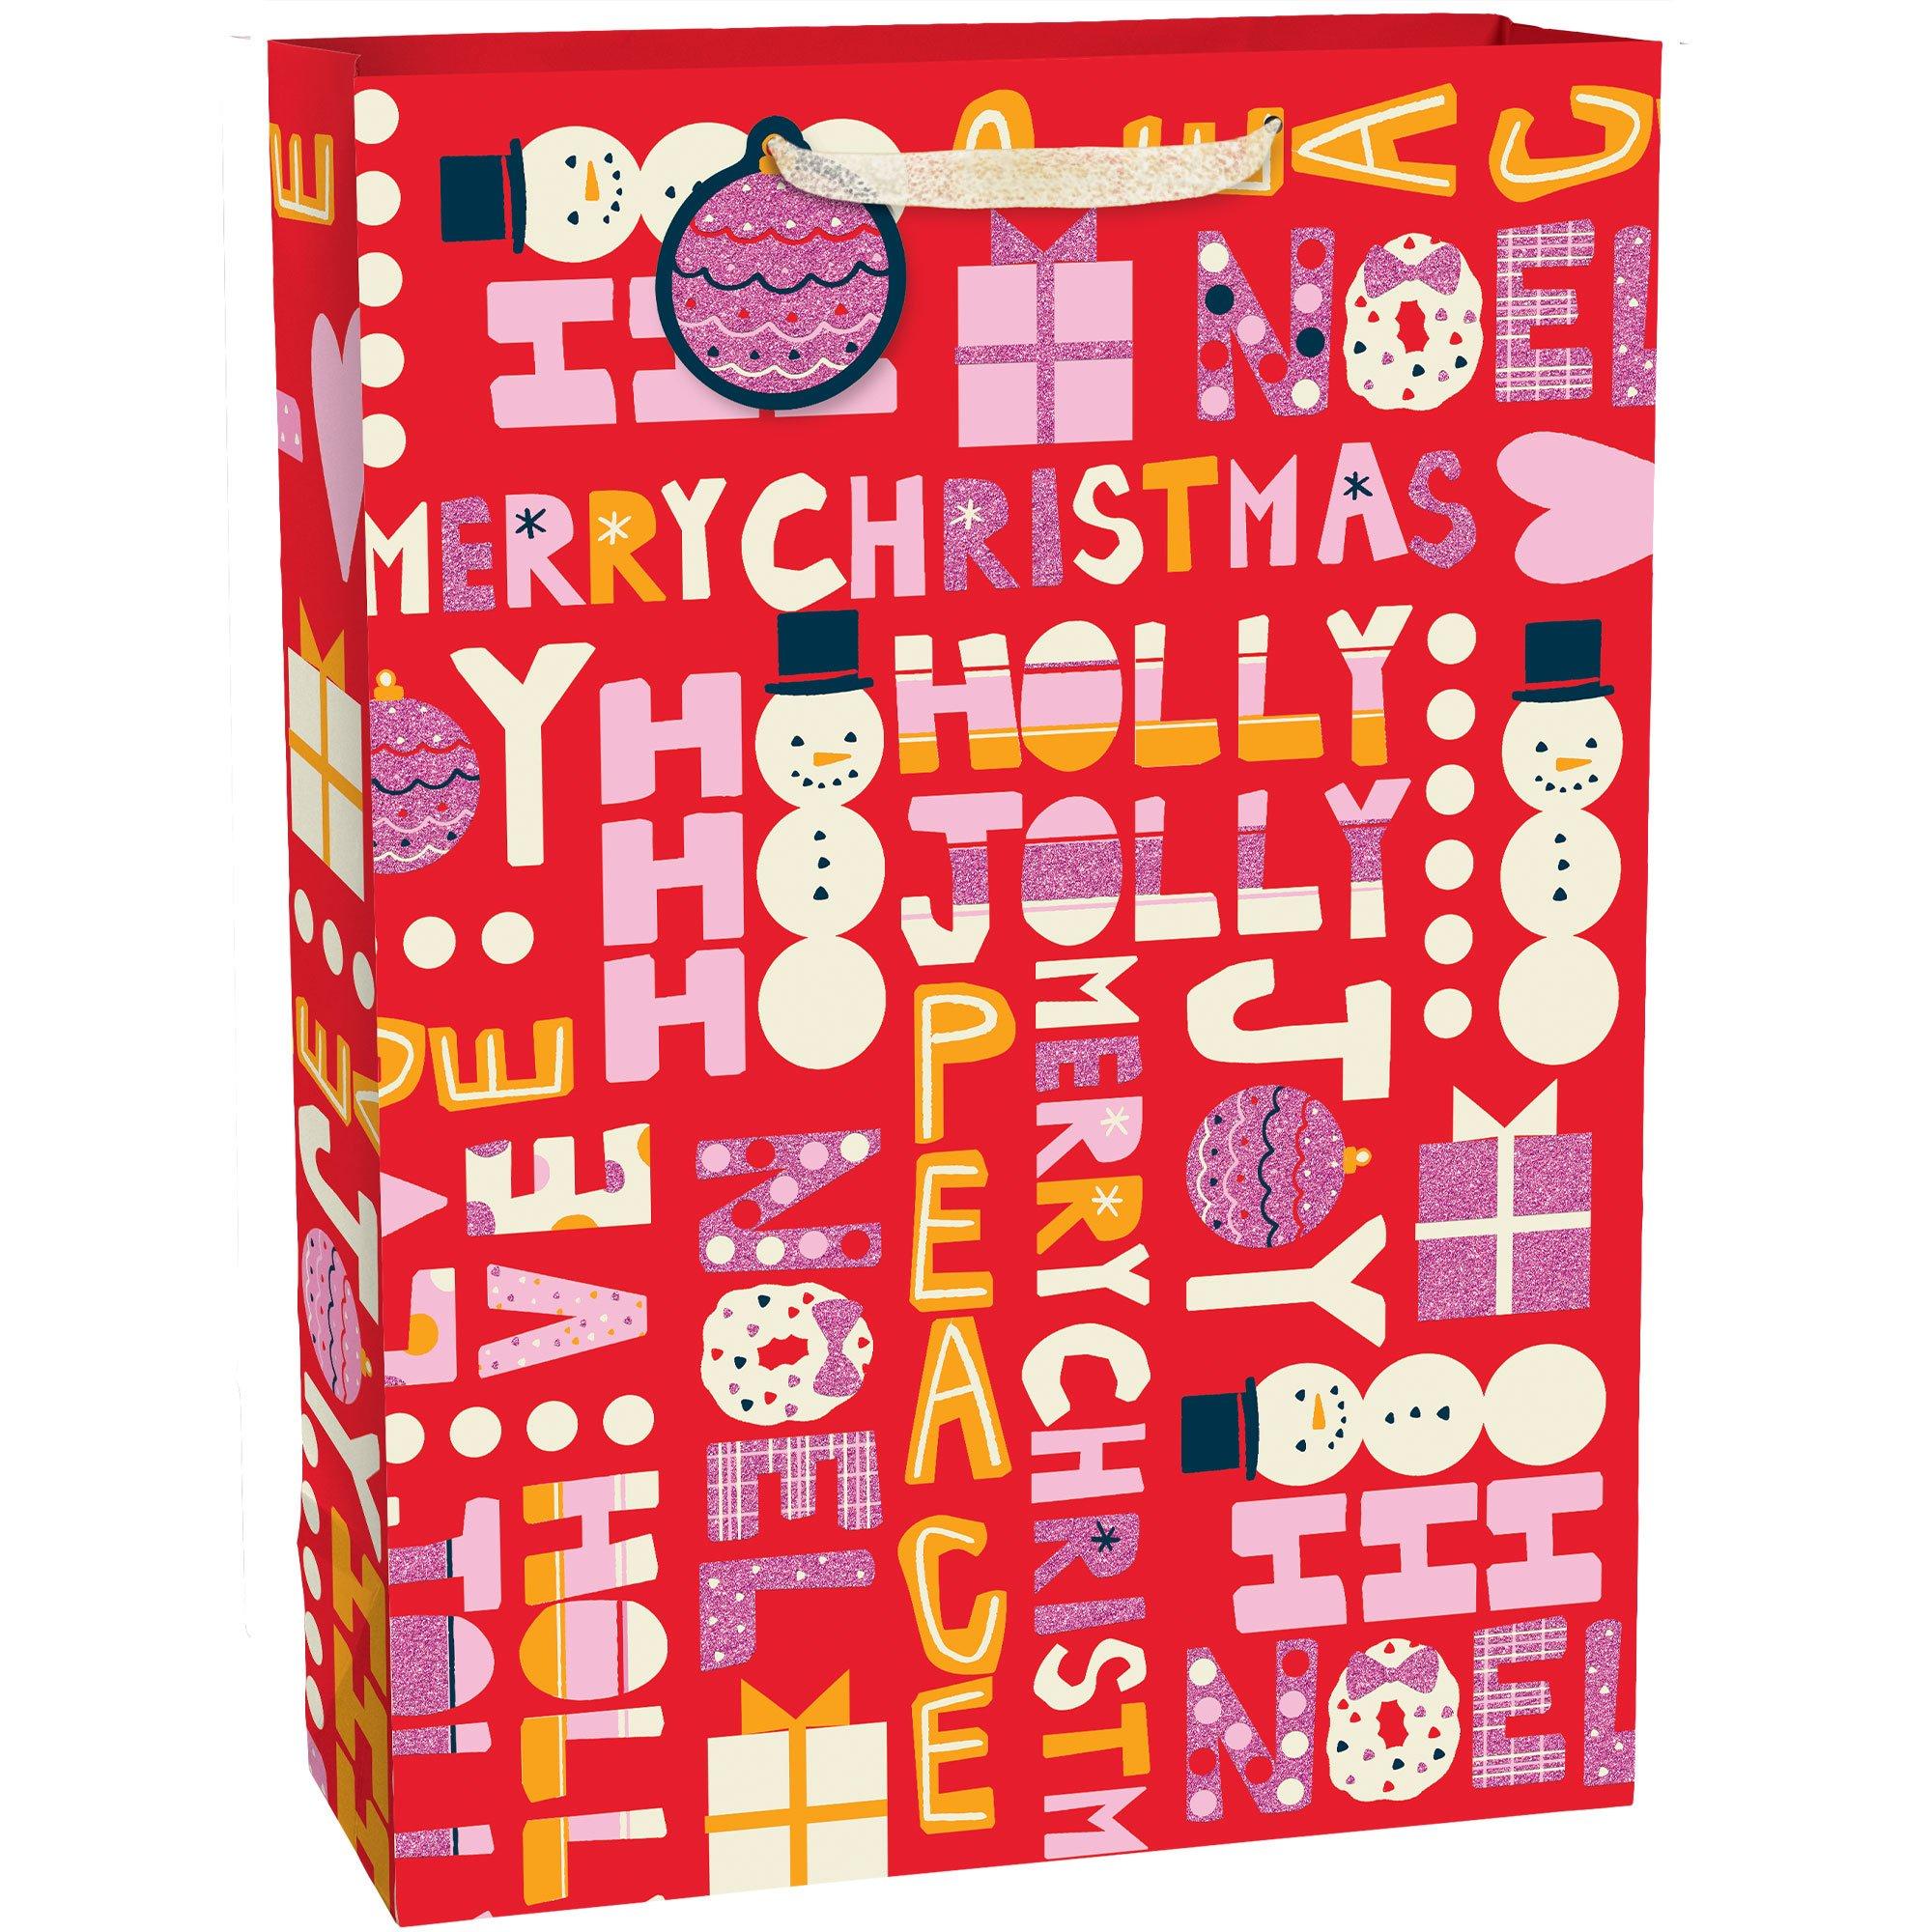 Holly Jolly Christmas Paper Gift Bag, 20in x 28in